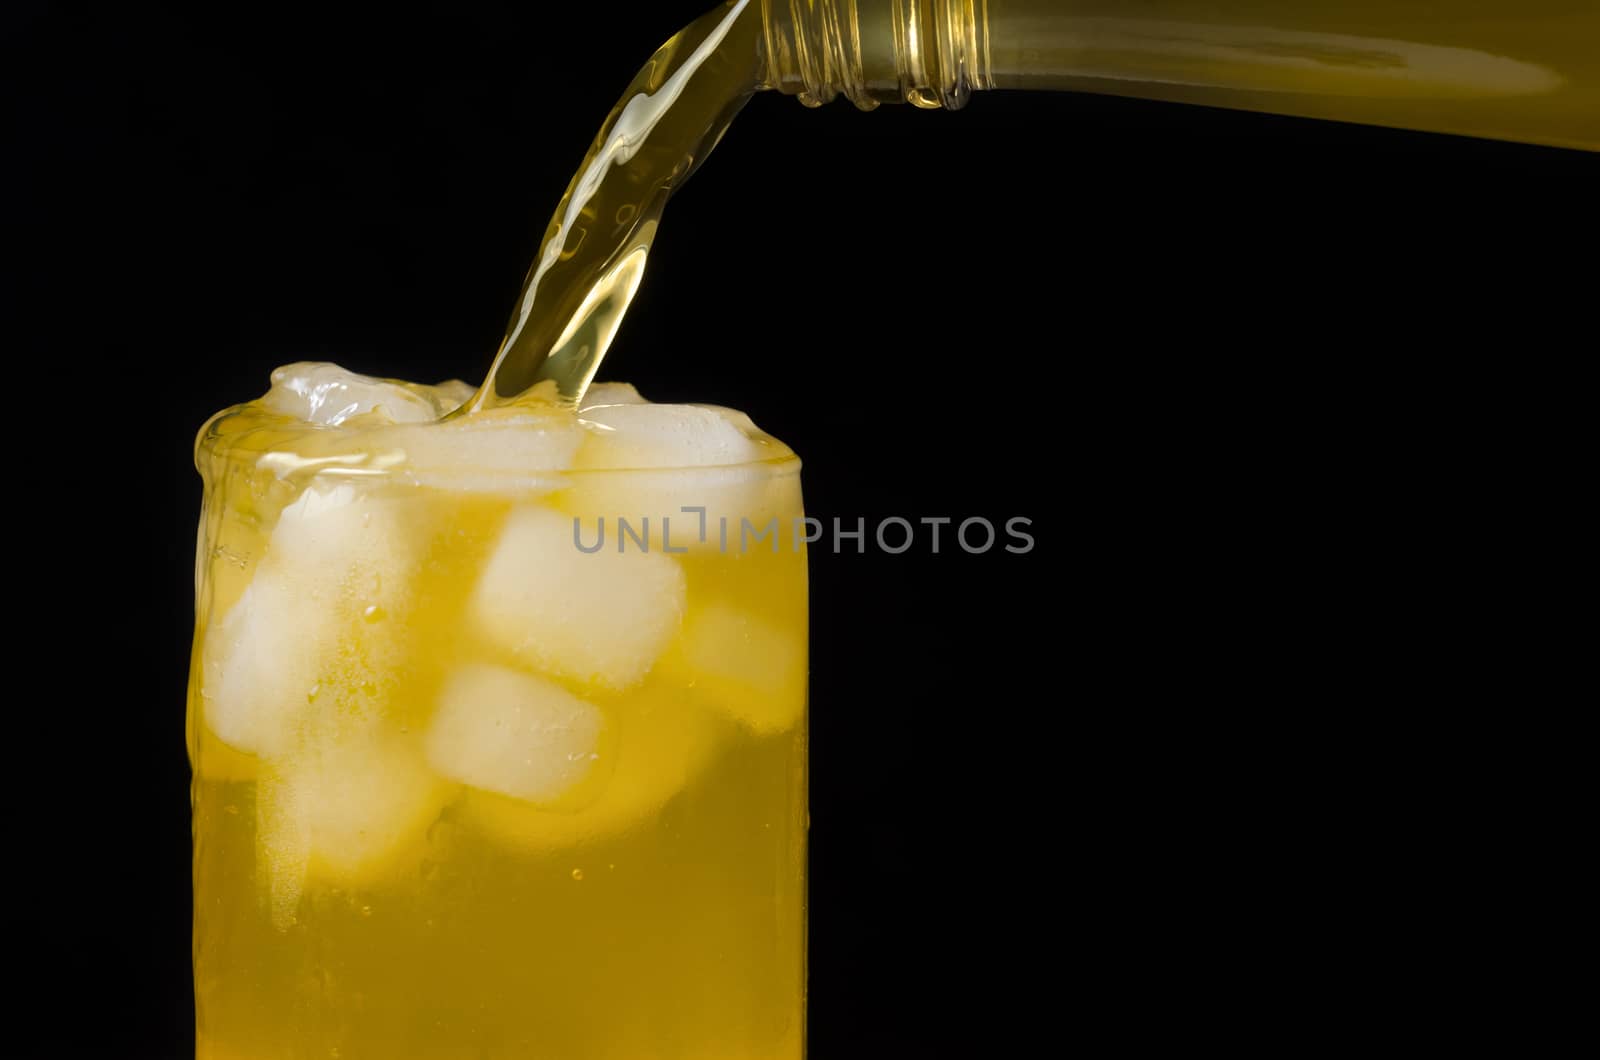 The lemonade poured over the edge ,from a bottle into a glass with ice. Black background.